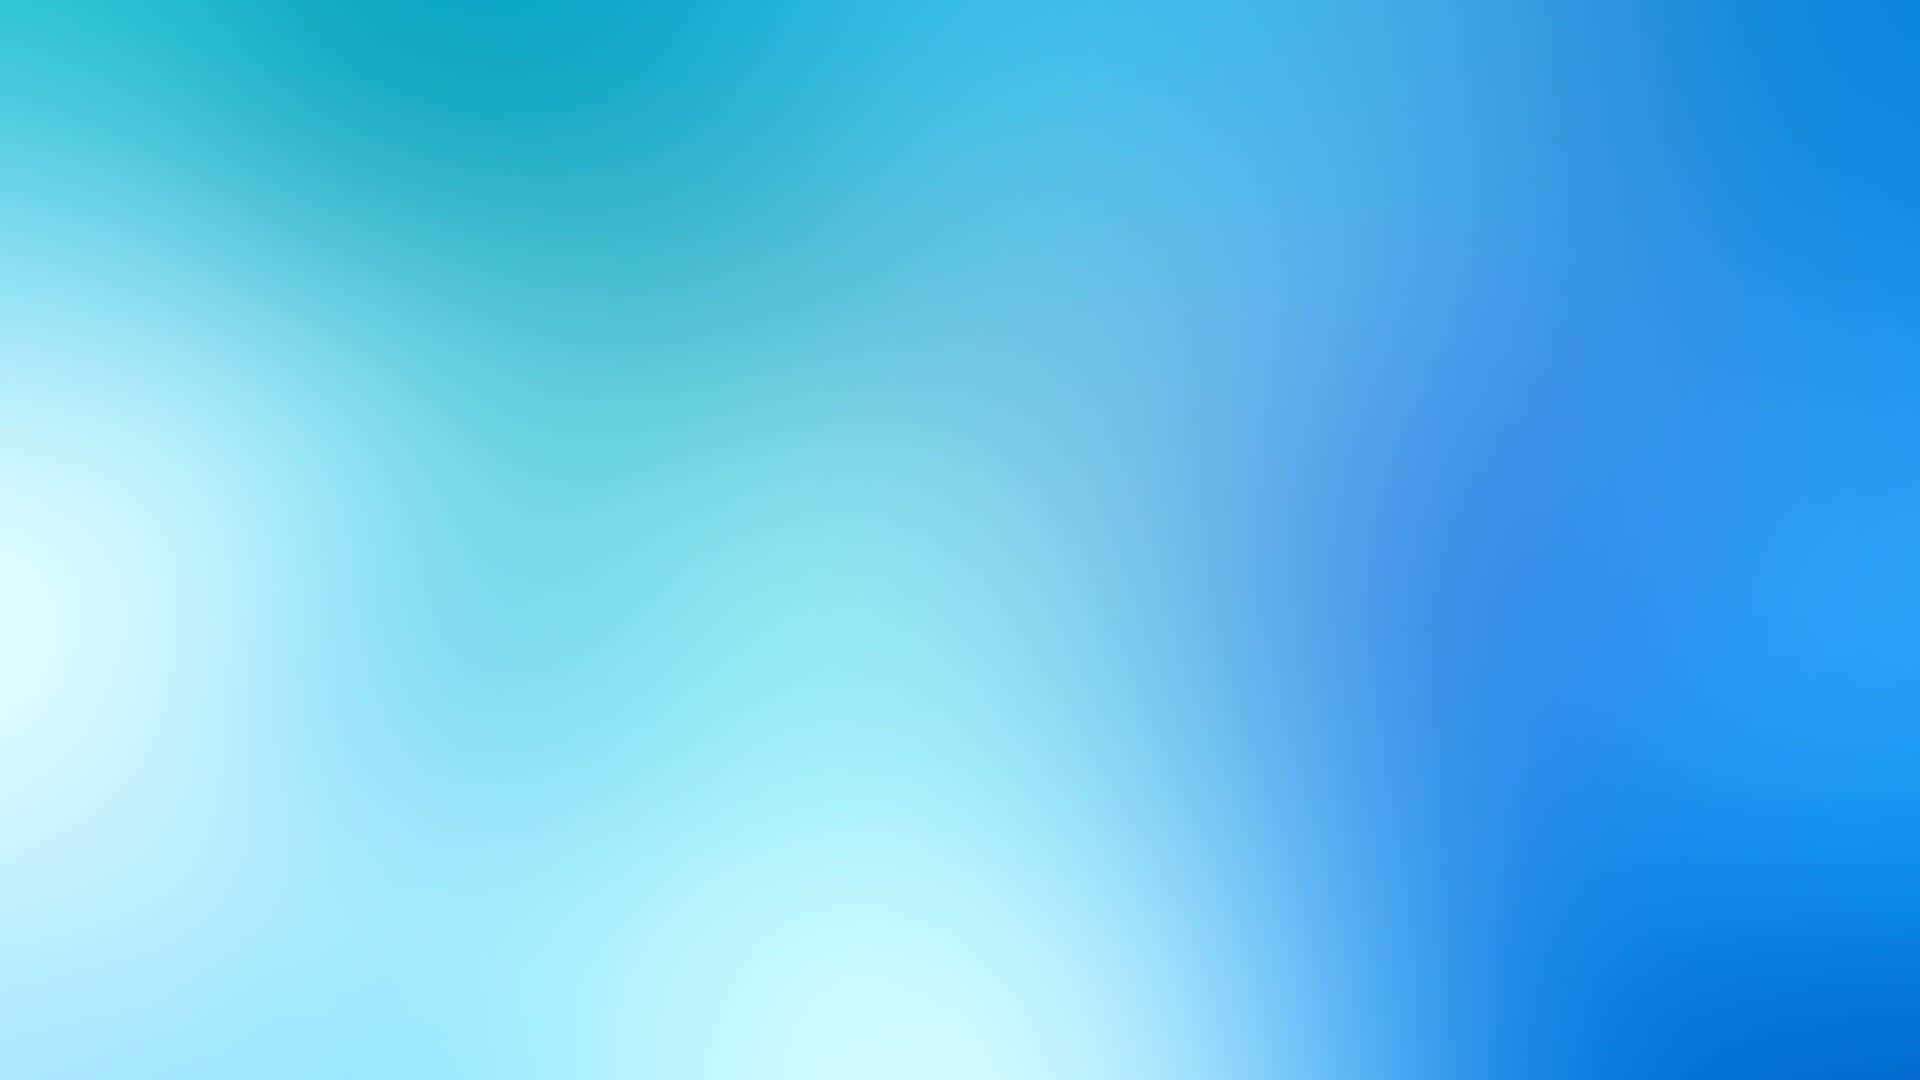 A Soft, Relaxing Blue Fade Background